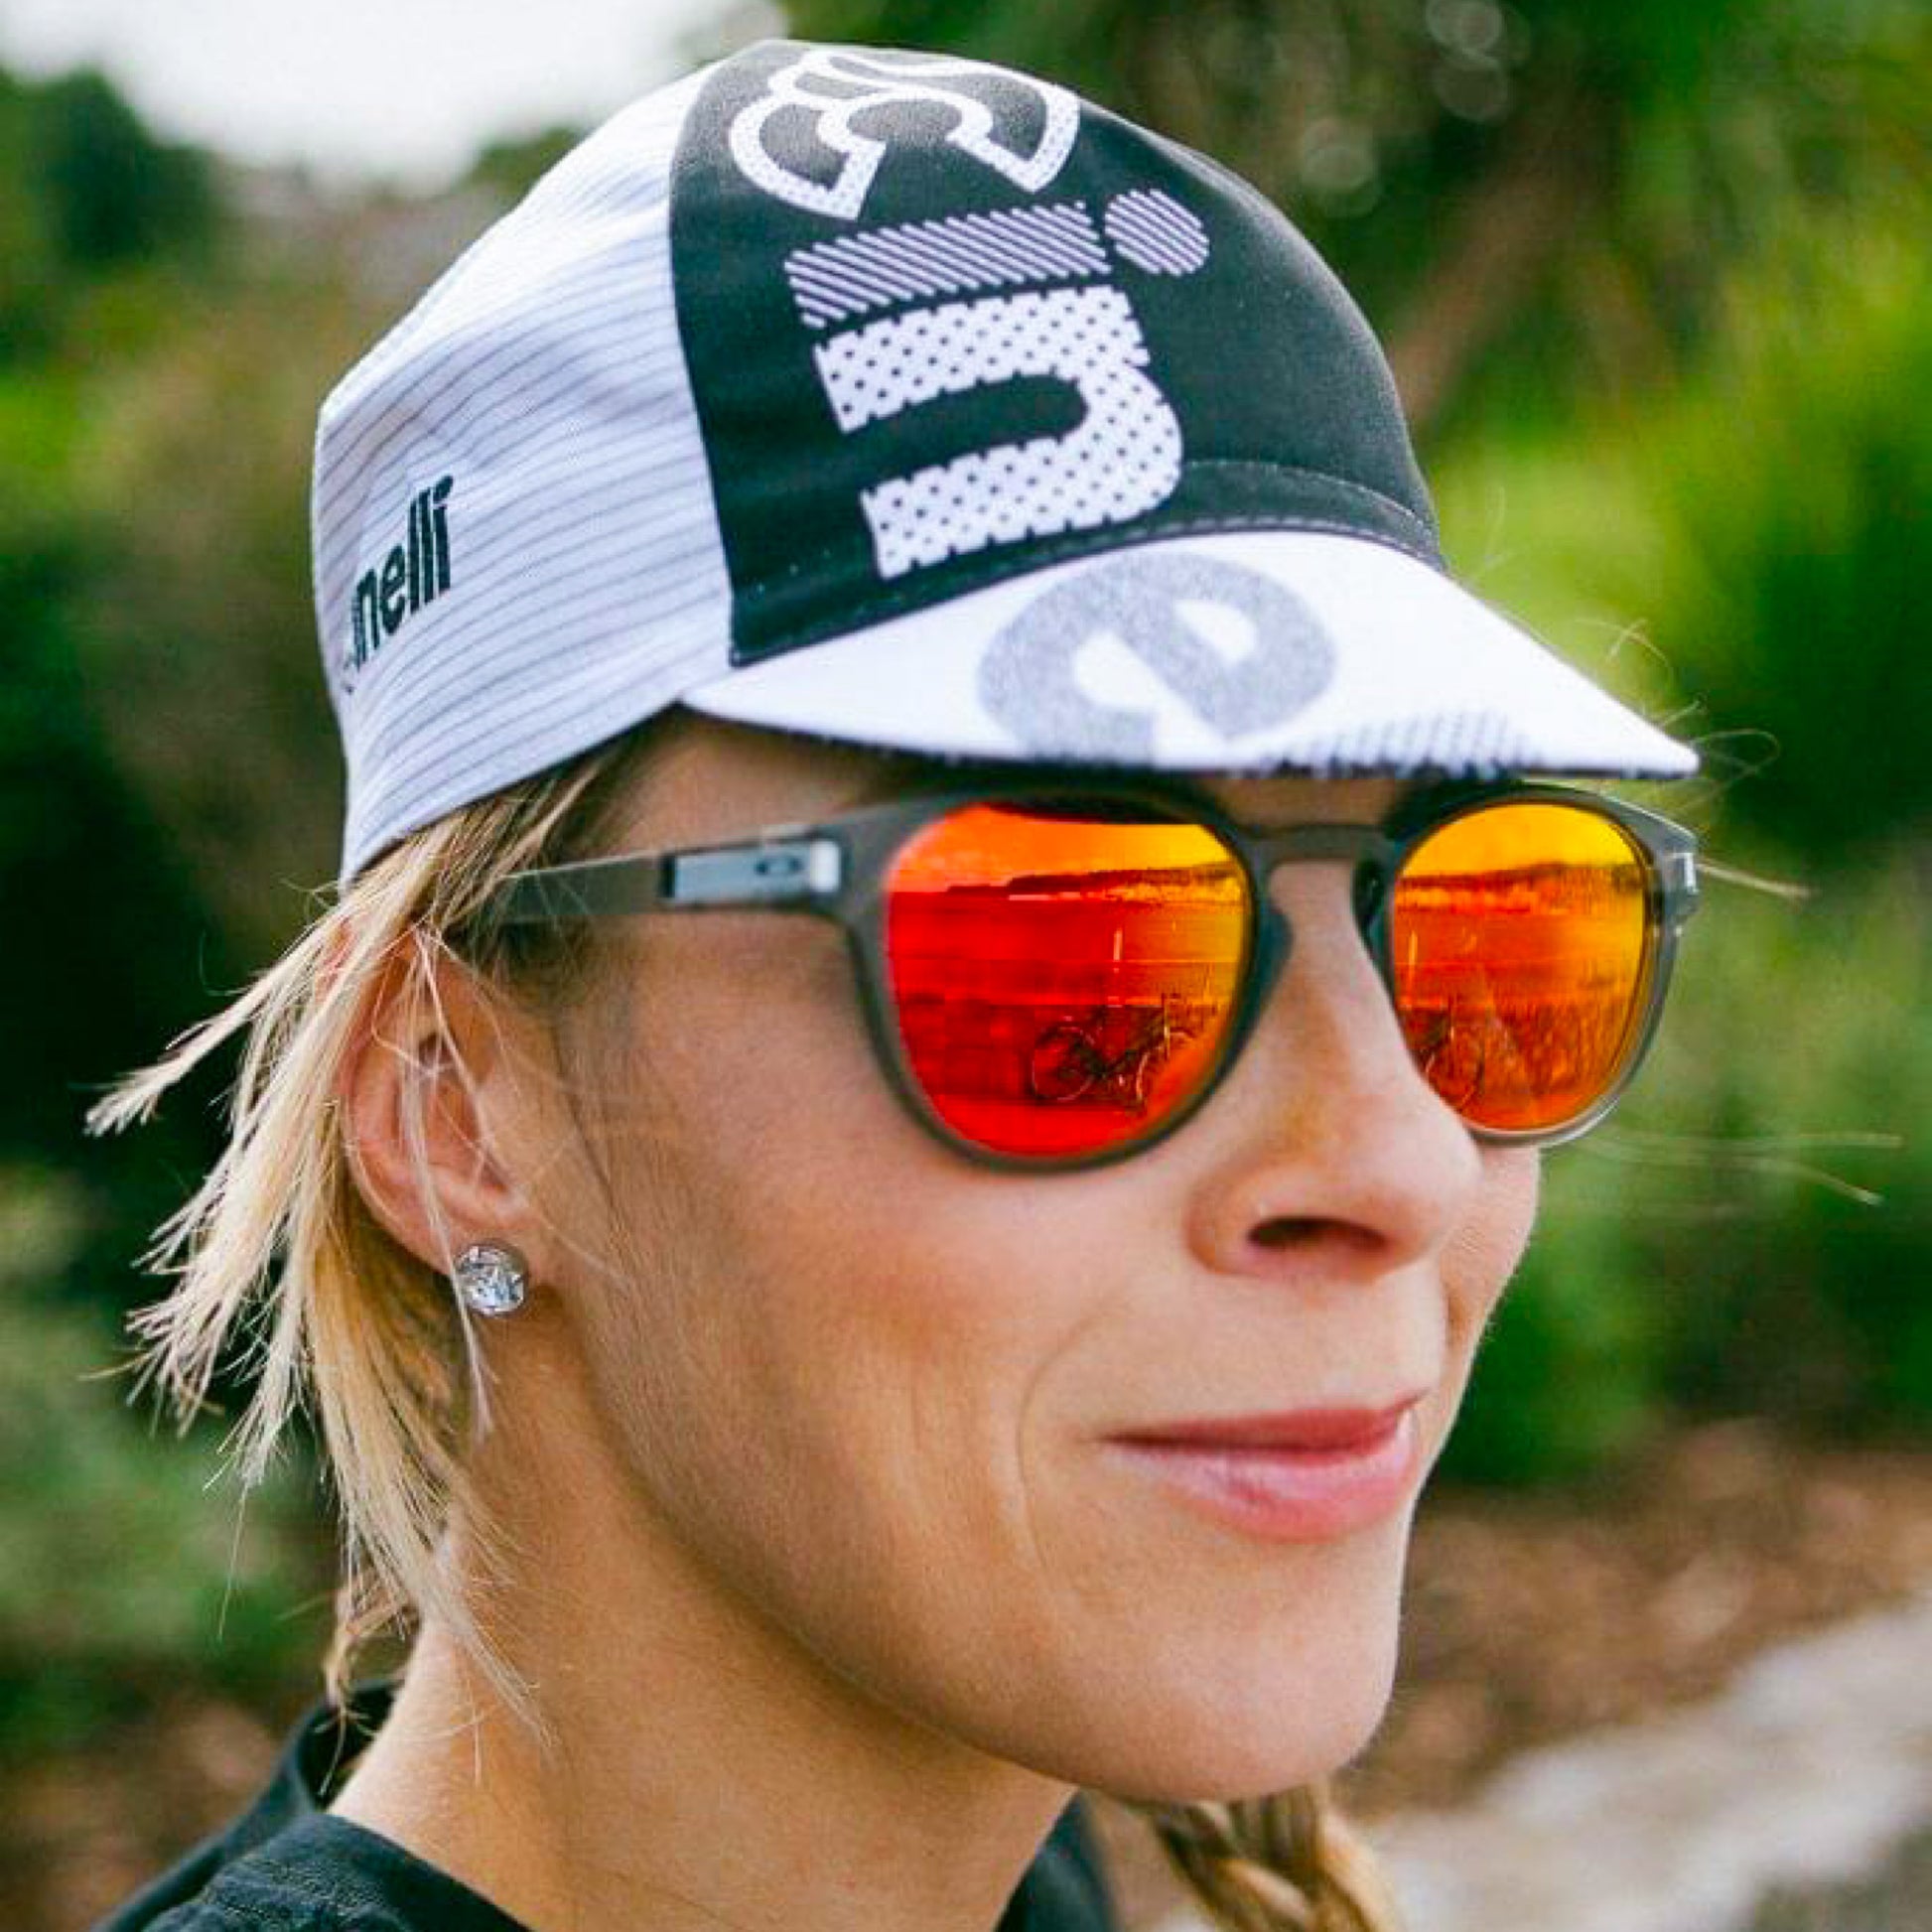 Cinelli Optical Cycling Cap White Available at Ascender Cycling Club Zürich Switzerland Live Front Side View 